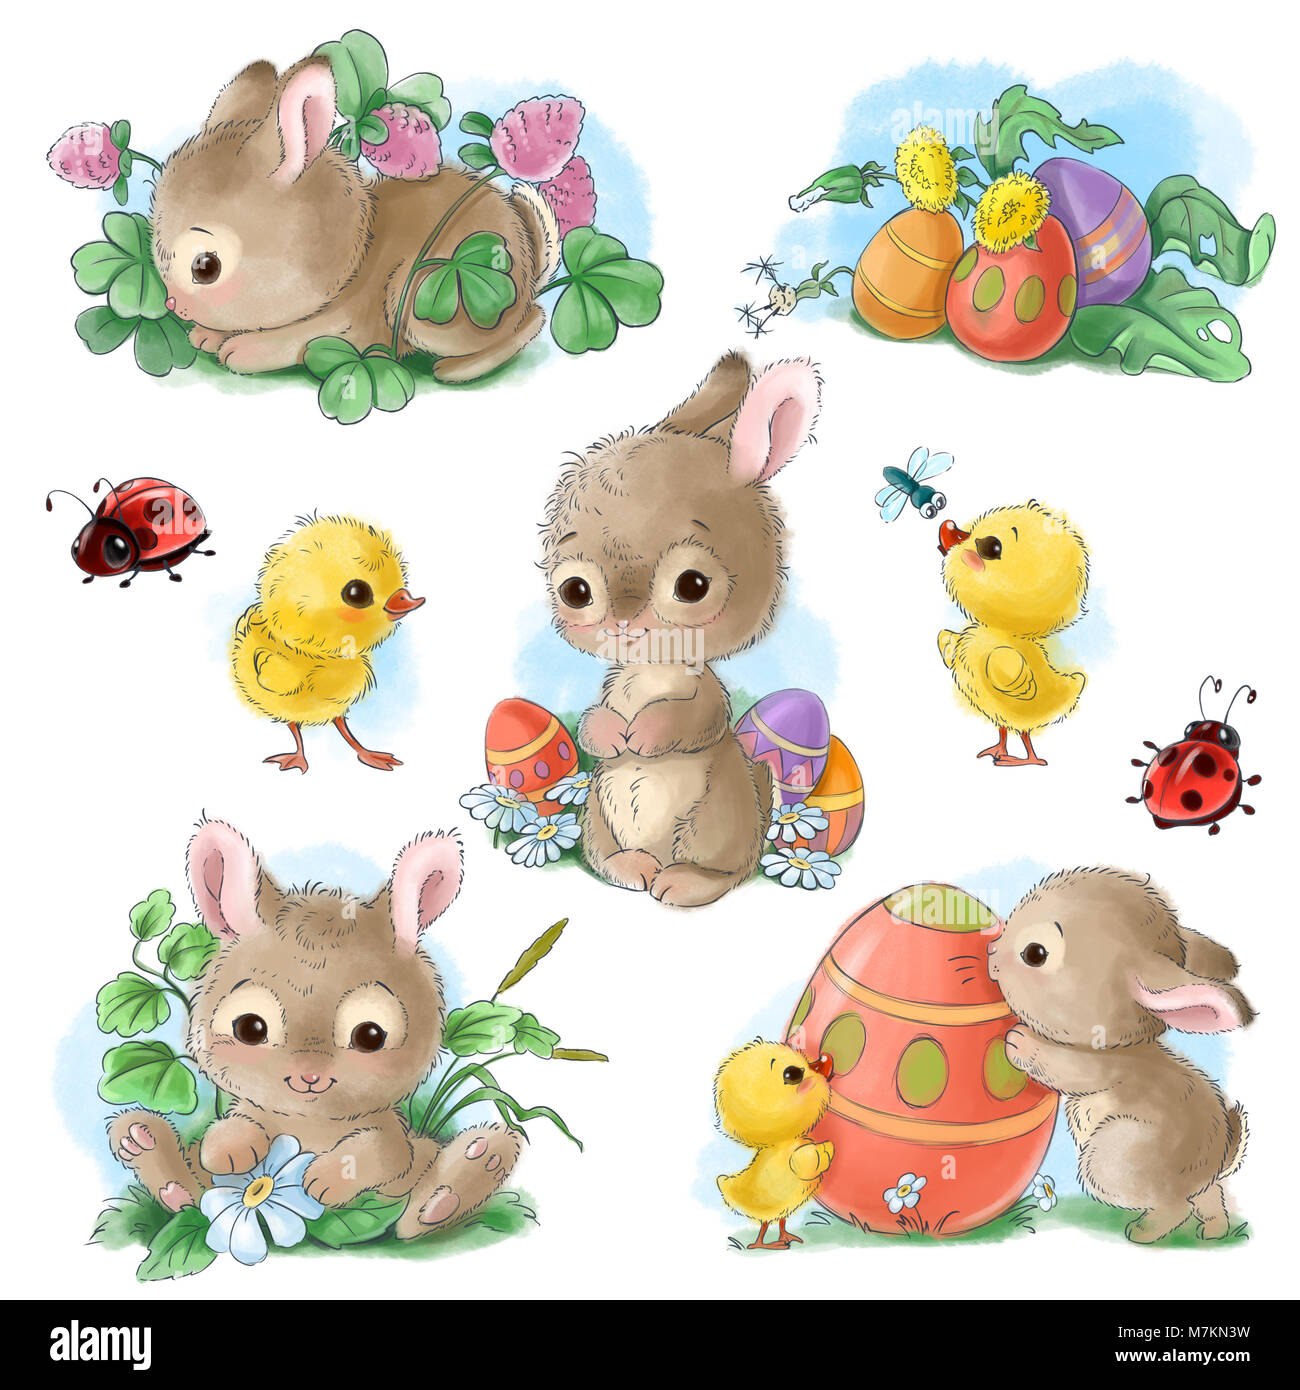 Set of cute Easter cartoon characters and design elements. Easter bunny, chickens, eggs and flowers.  illustration. Stock Photo